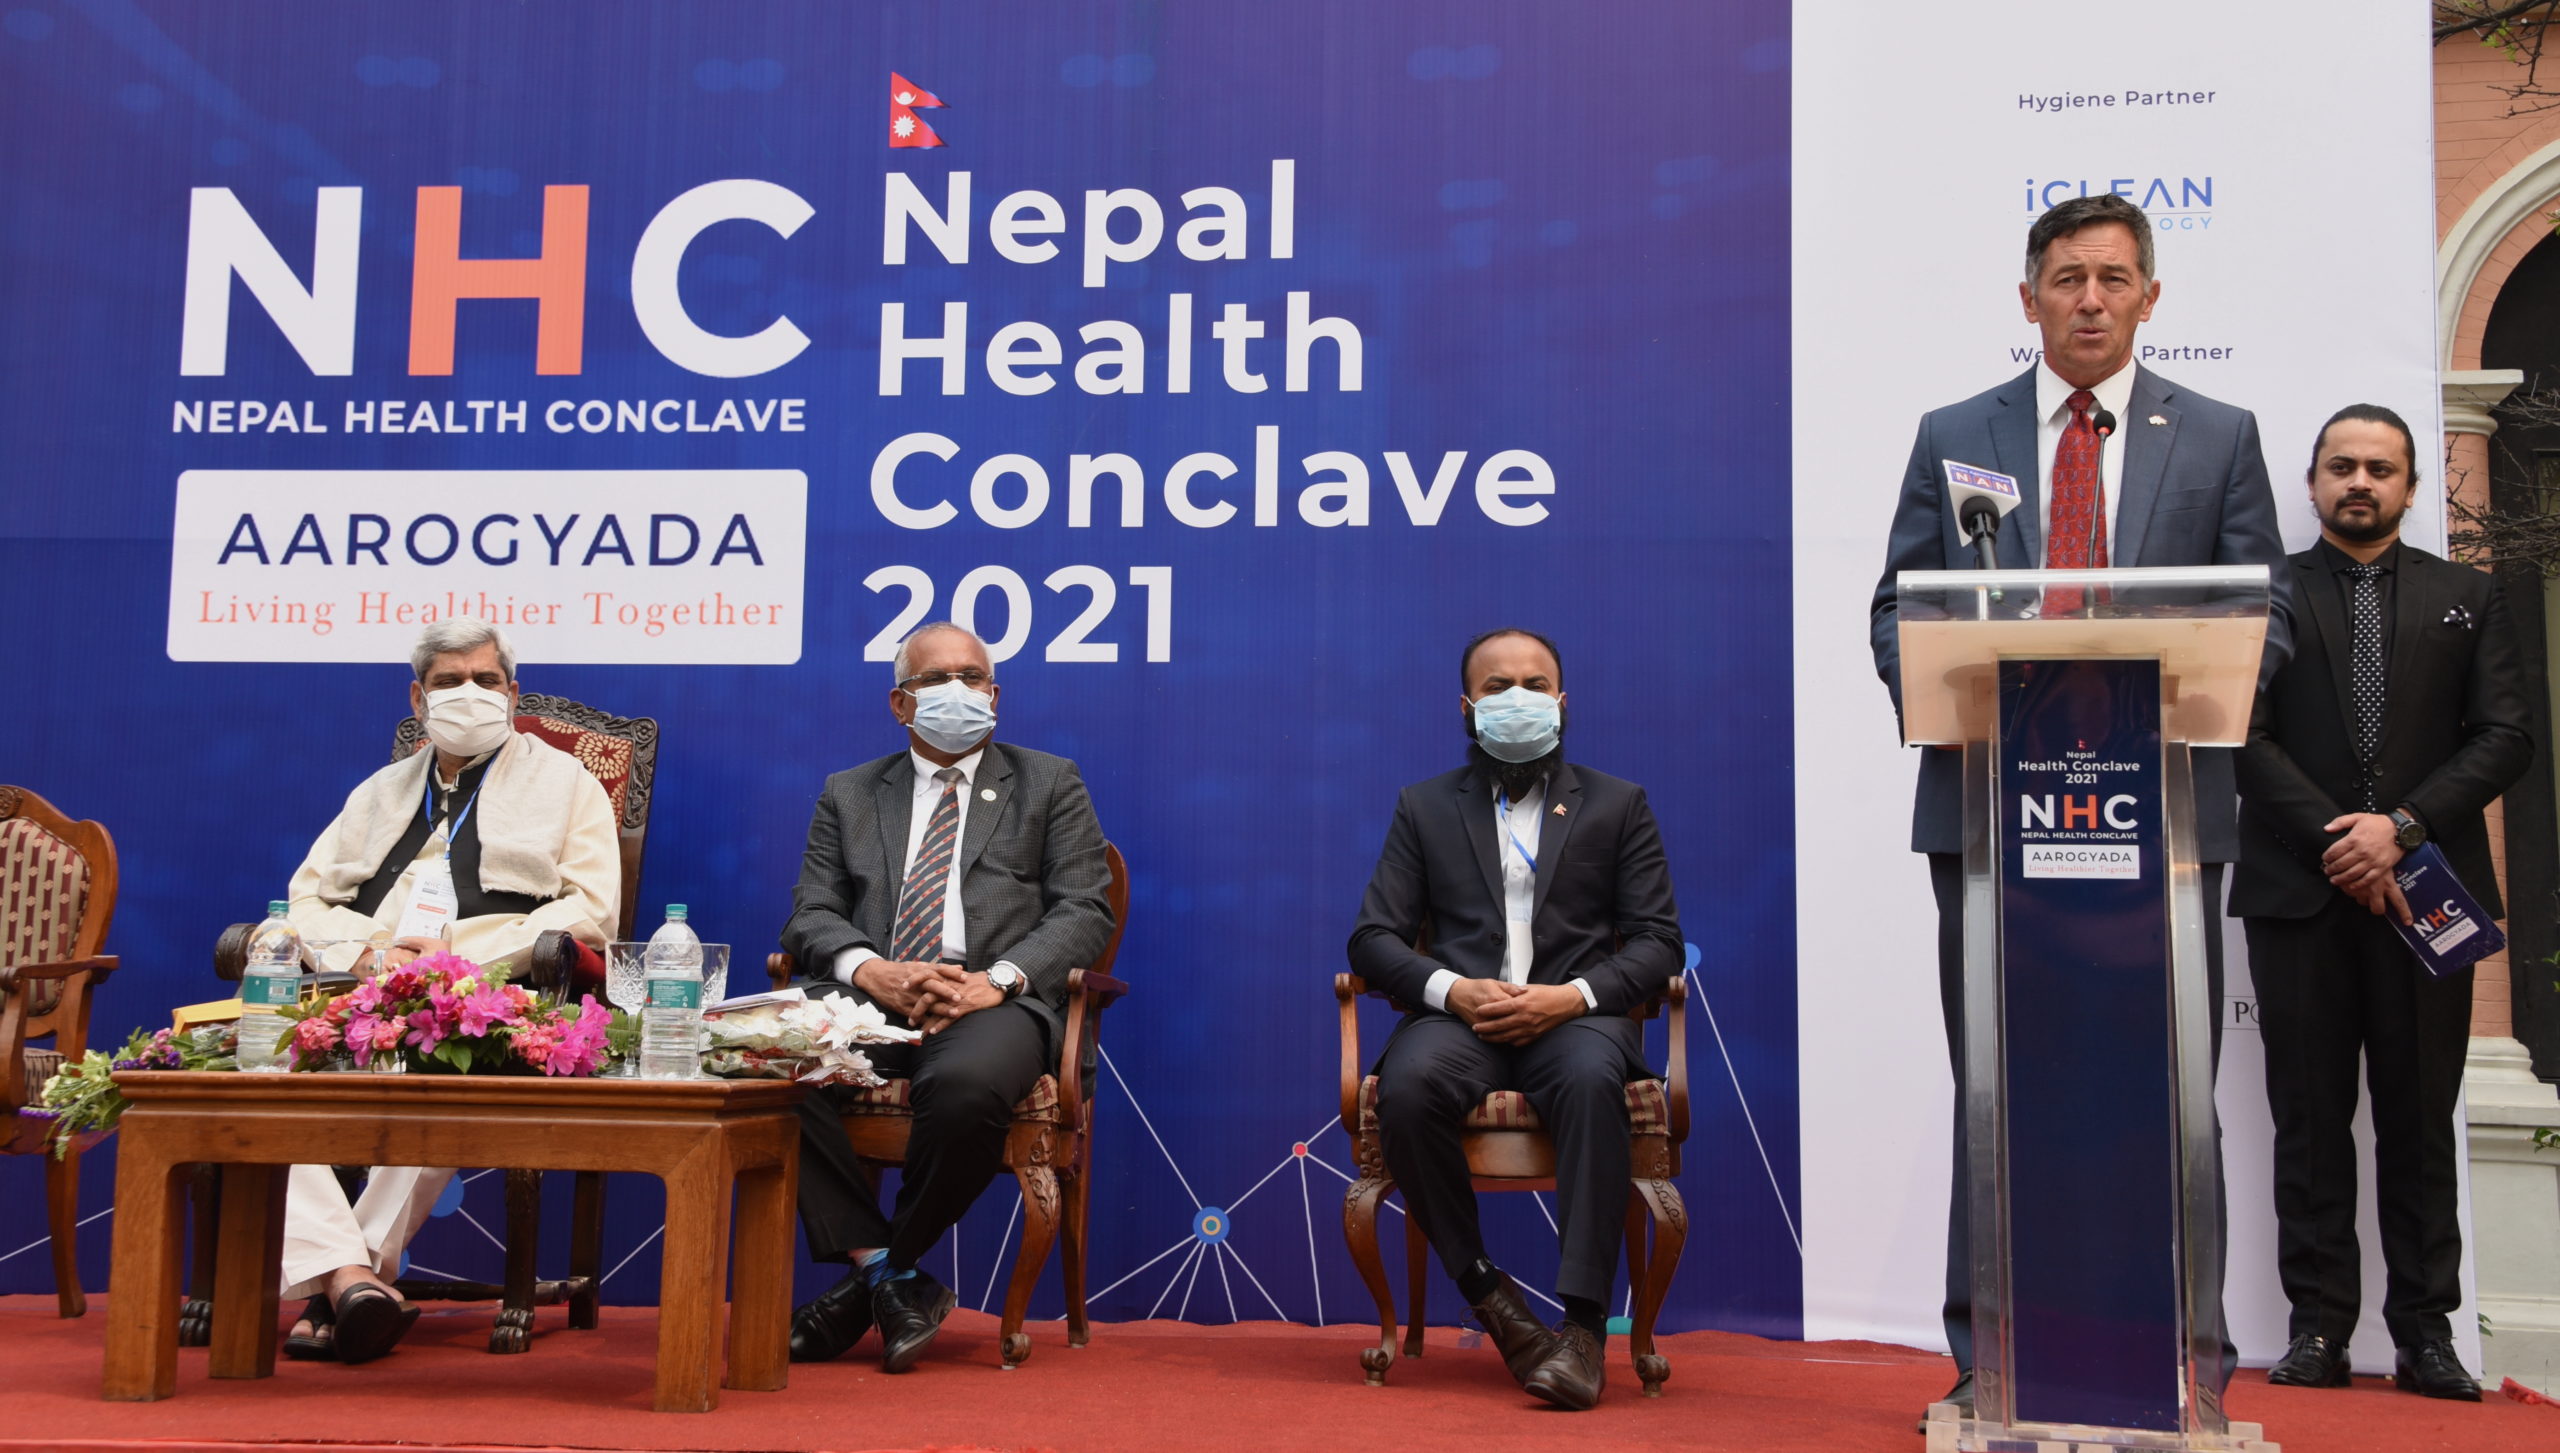 First-ever Nepal Health Conclave organized in Kathmandu